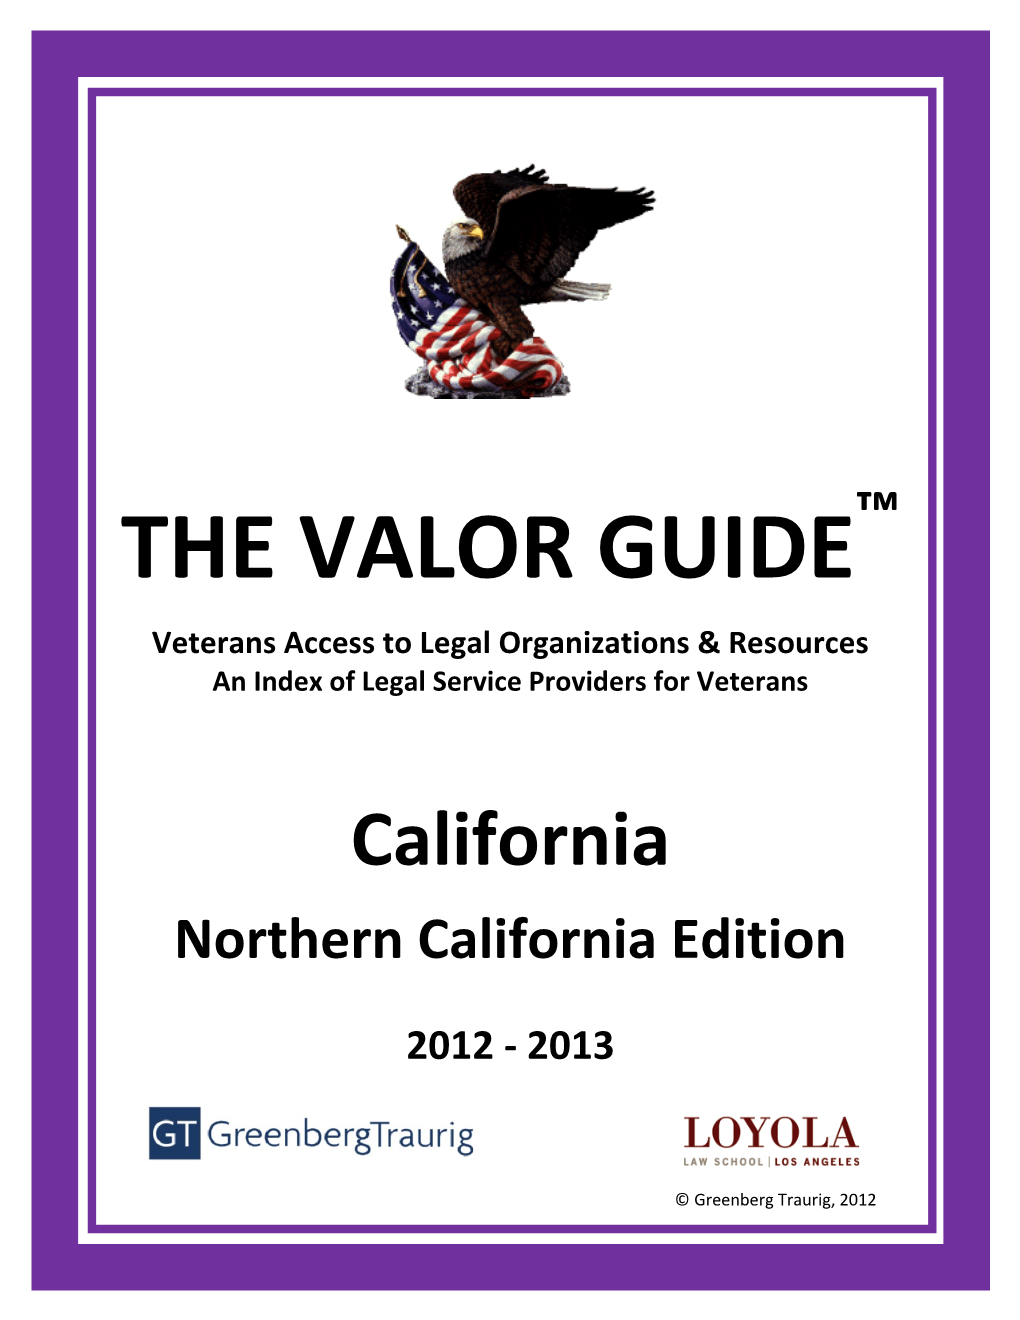 VALOR Guide: Northern California